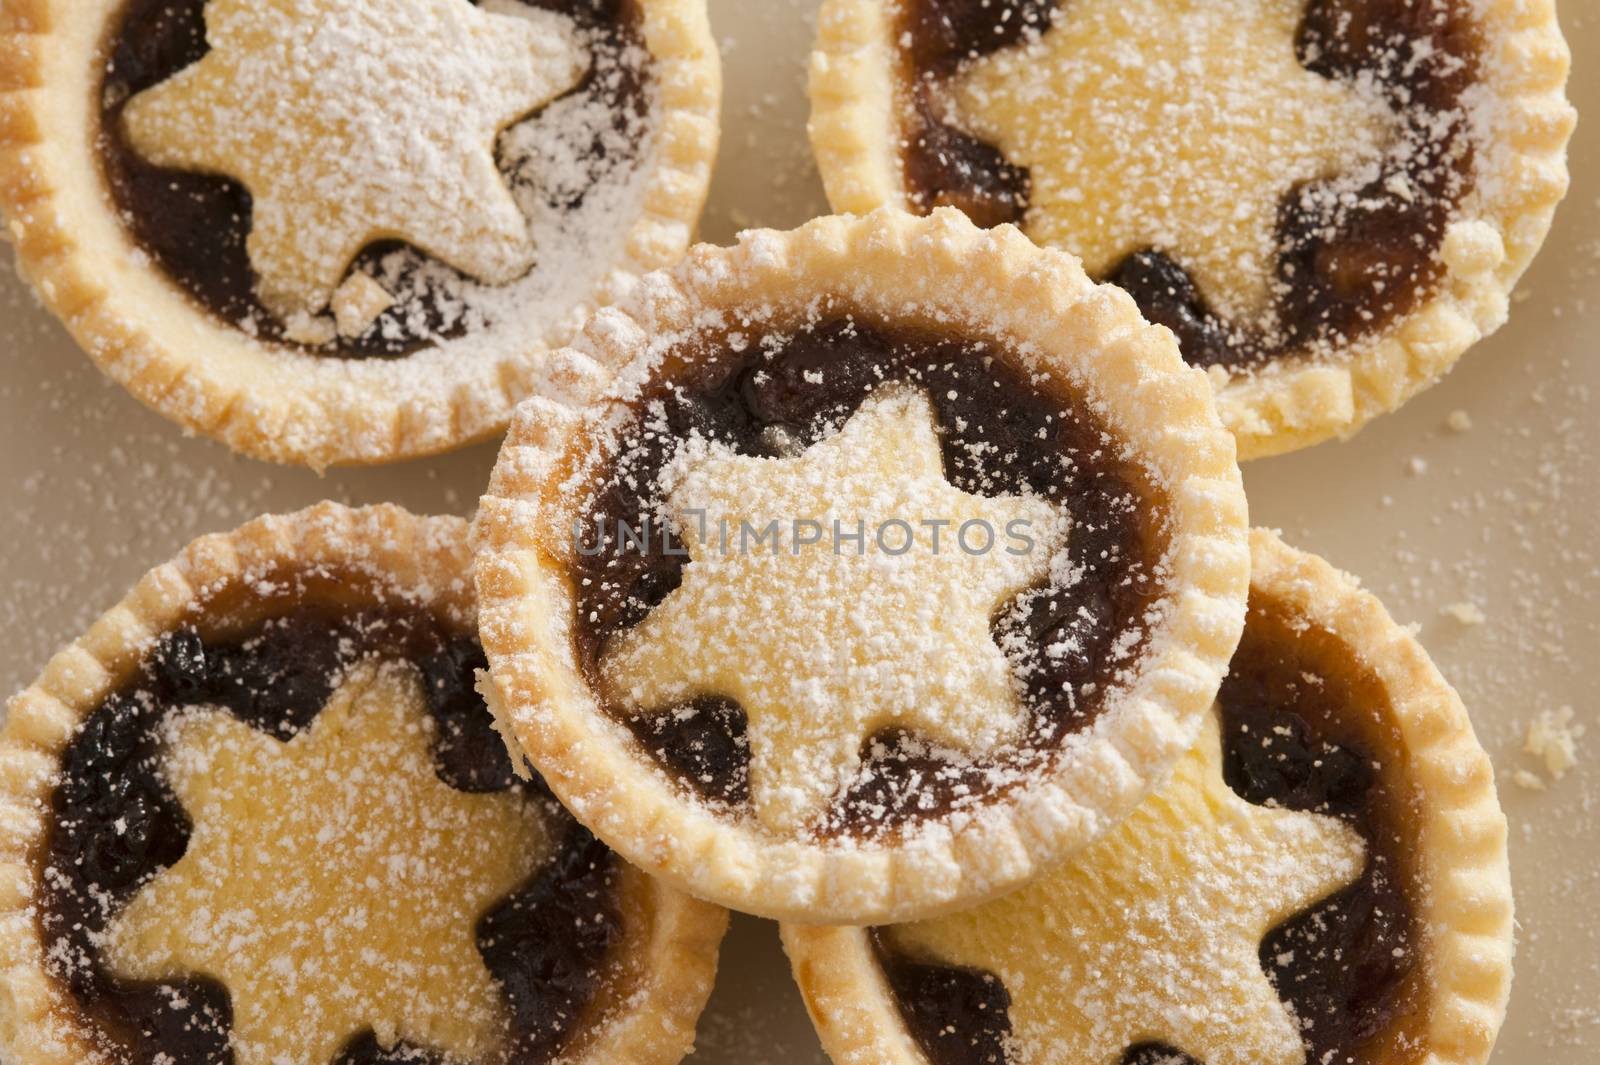 Background texture of decorative Christmas mince pies with crisp golden crusts and pastry stars for a traditional seasonal treat